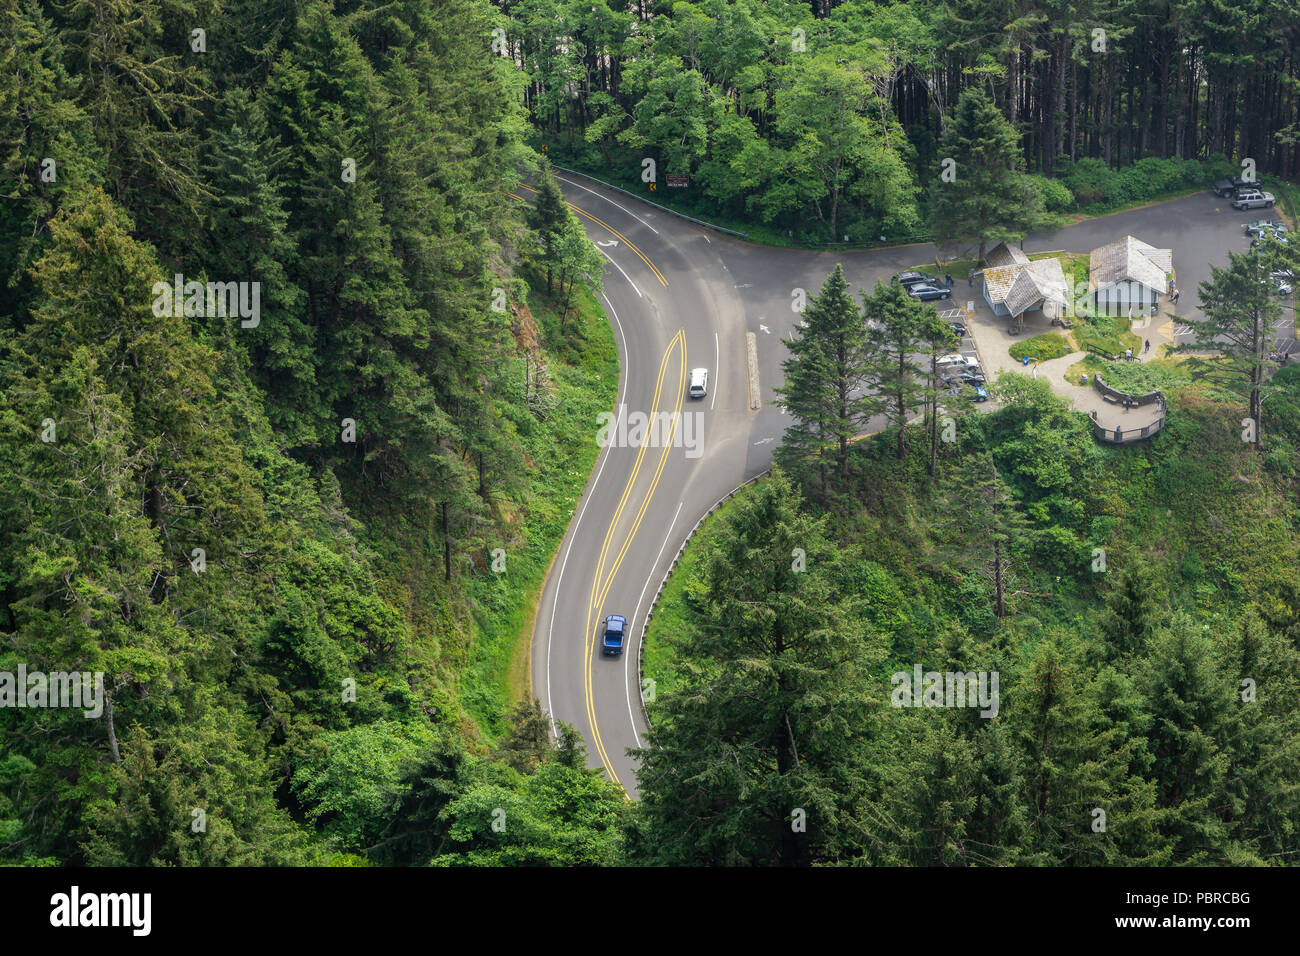 Aerial view of us route 101 at Cape Perpetua Scenic Area with resting area and traffic, winding through pine forest, Oregon, USA. Stock Photo